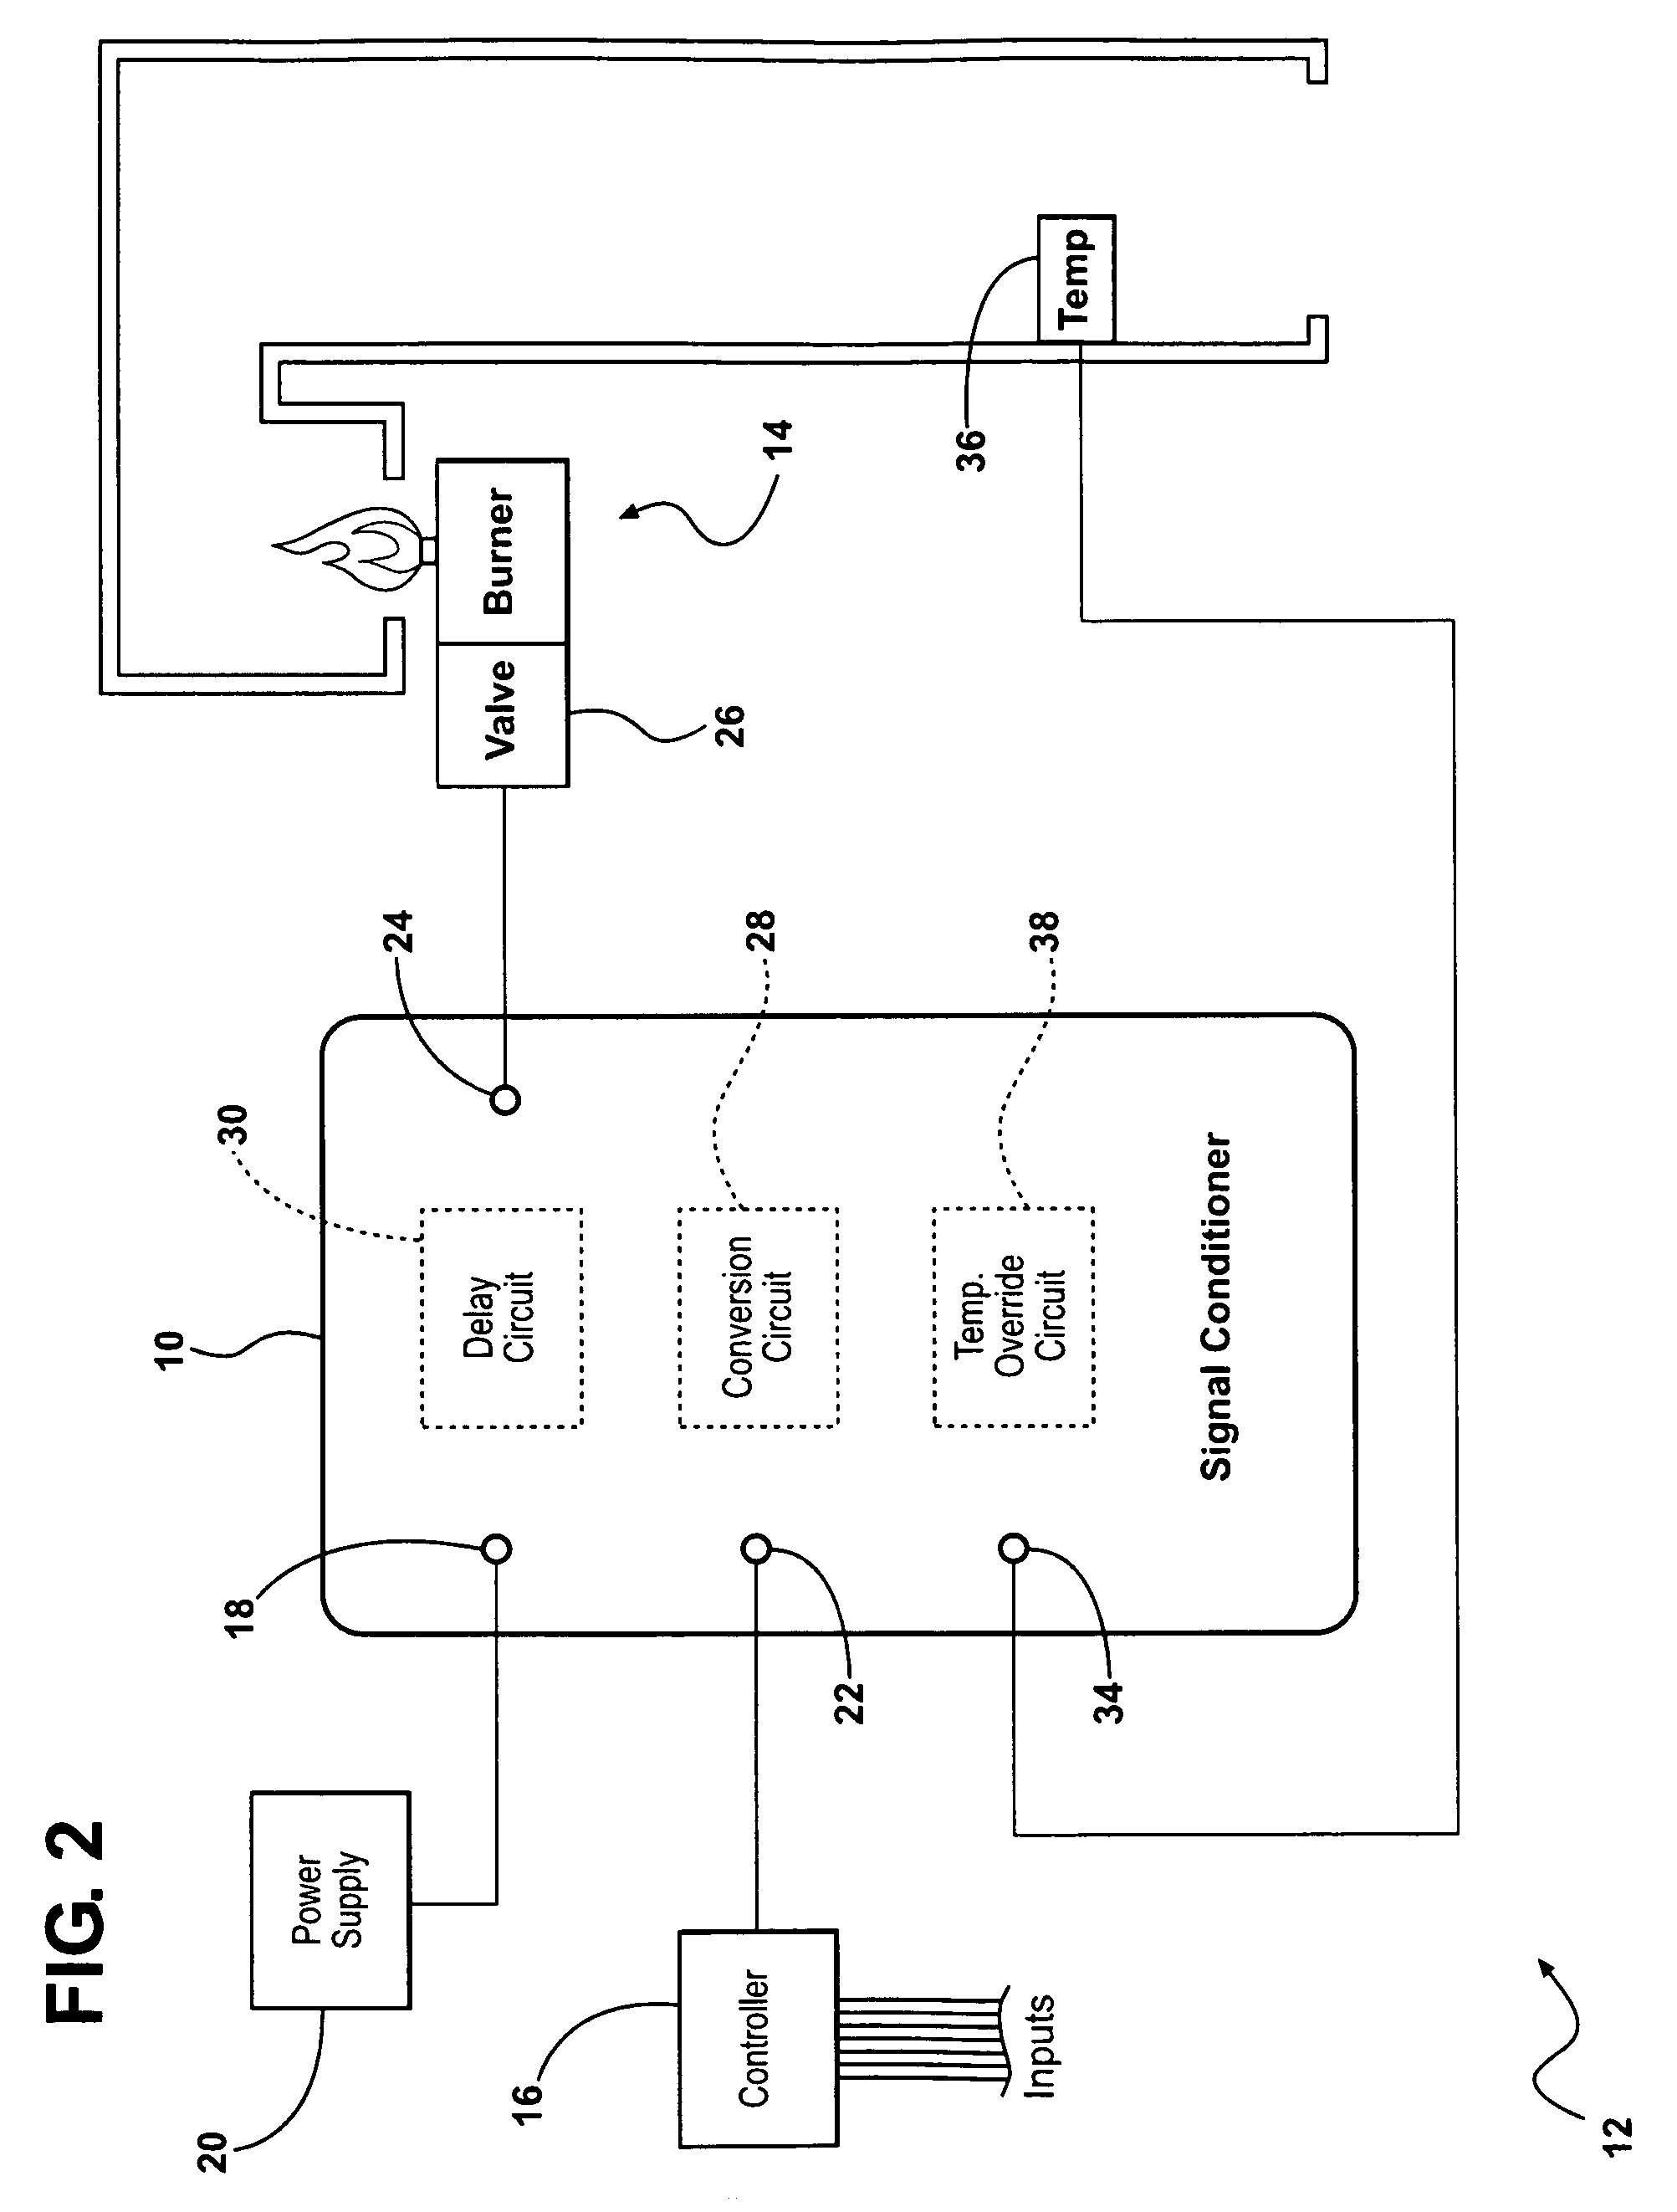 Signal conditioner for use in a burner control system